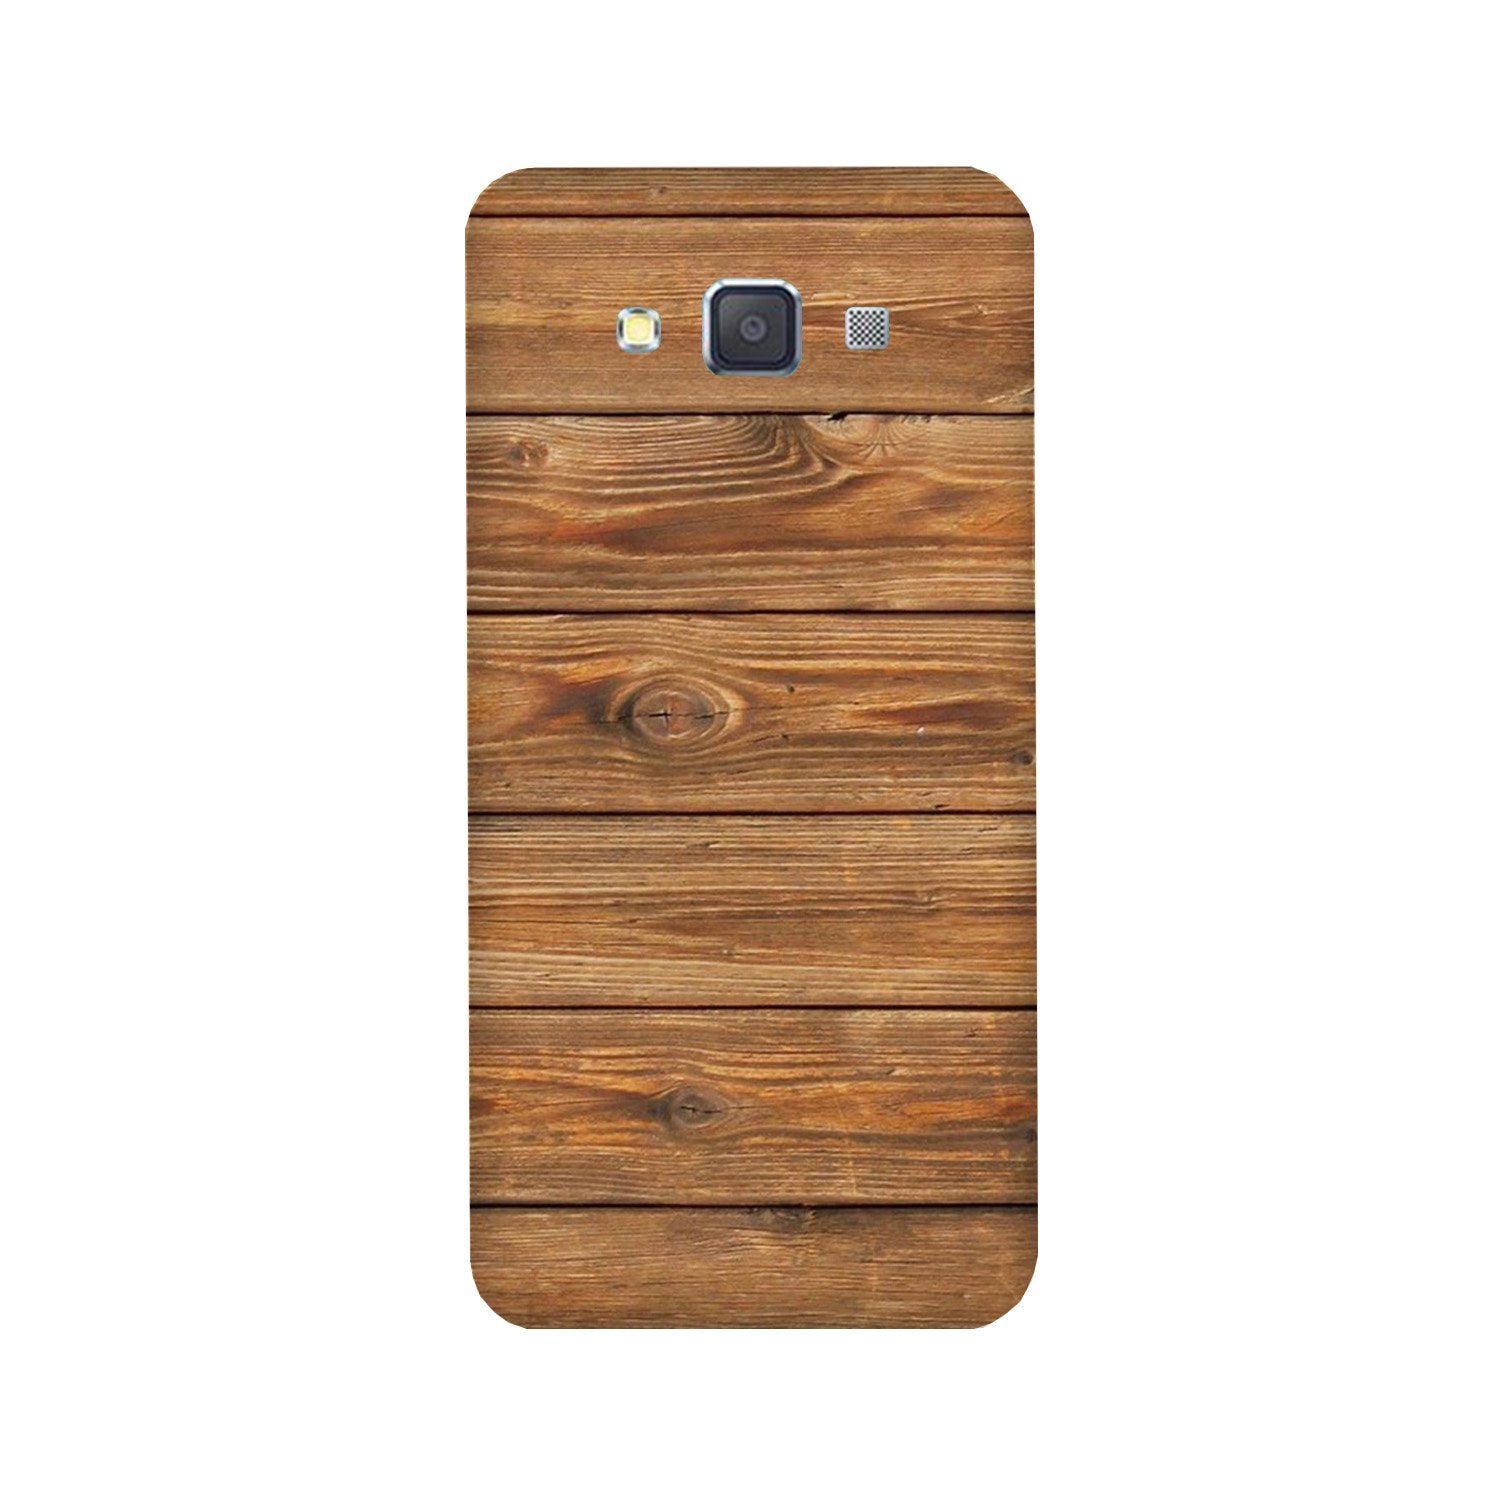 Wooden Look Case for Galaxy Grand Max  (Design - 113)